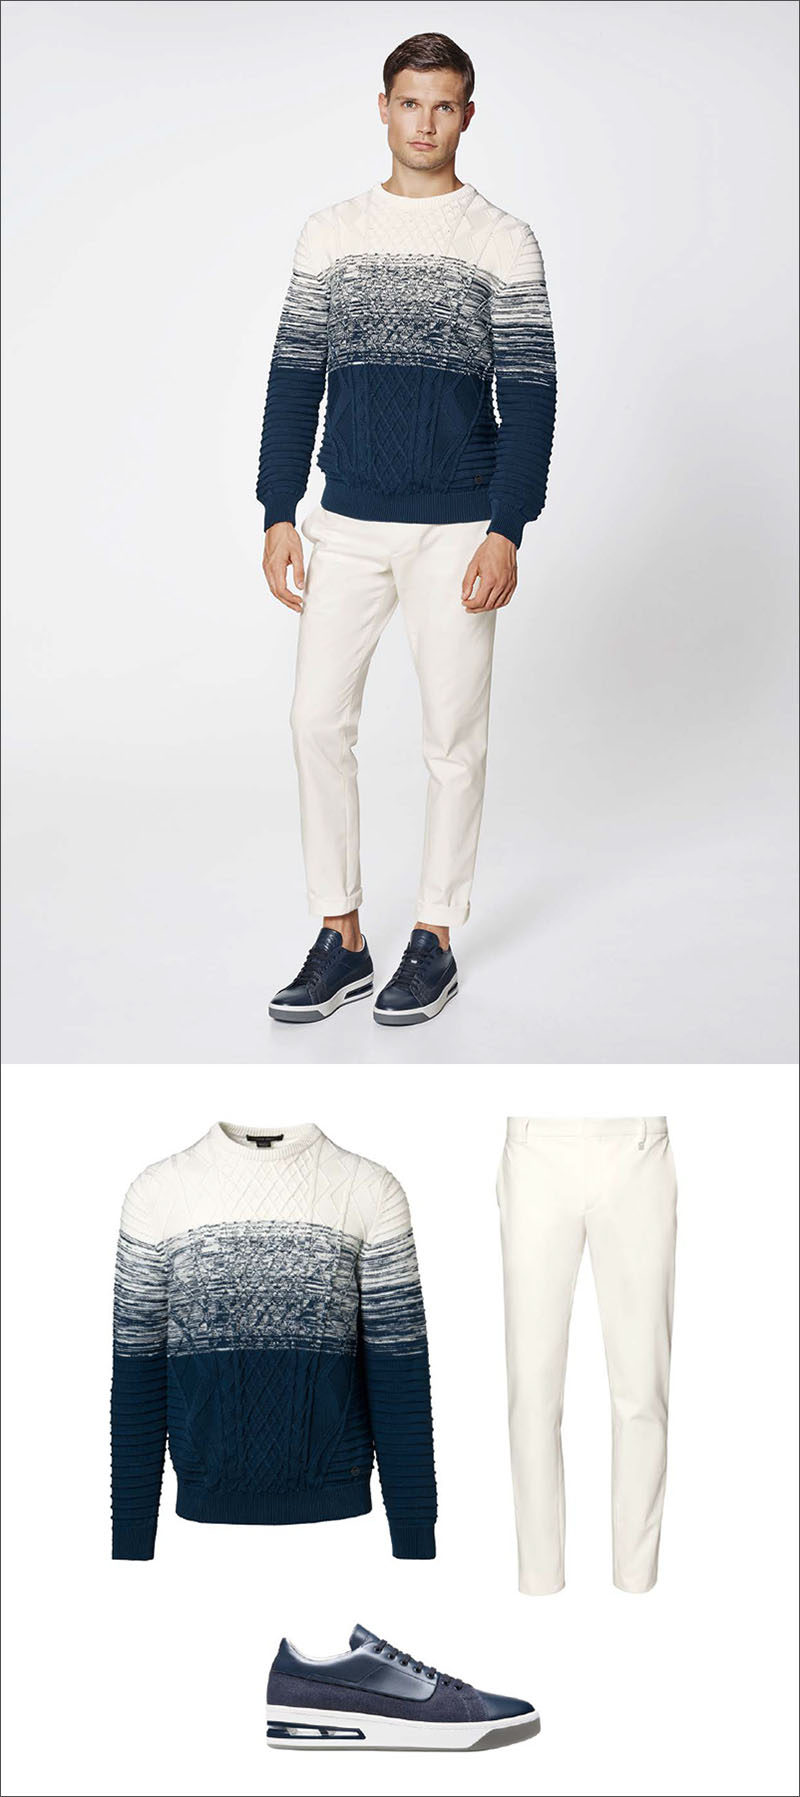 Men's Fashion Ideas - 17 Men's Outfits From Porsche Design's 2017 Spring/Summer Collection | This simple men's outfit is made up of an ombré cable knit sweater, white cotton pants, and navy blue sneakers that match the blues in the sweater to create the ultimate ensemble for early spring.